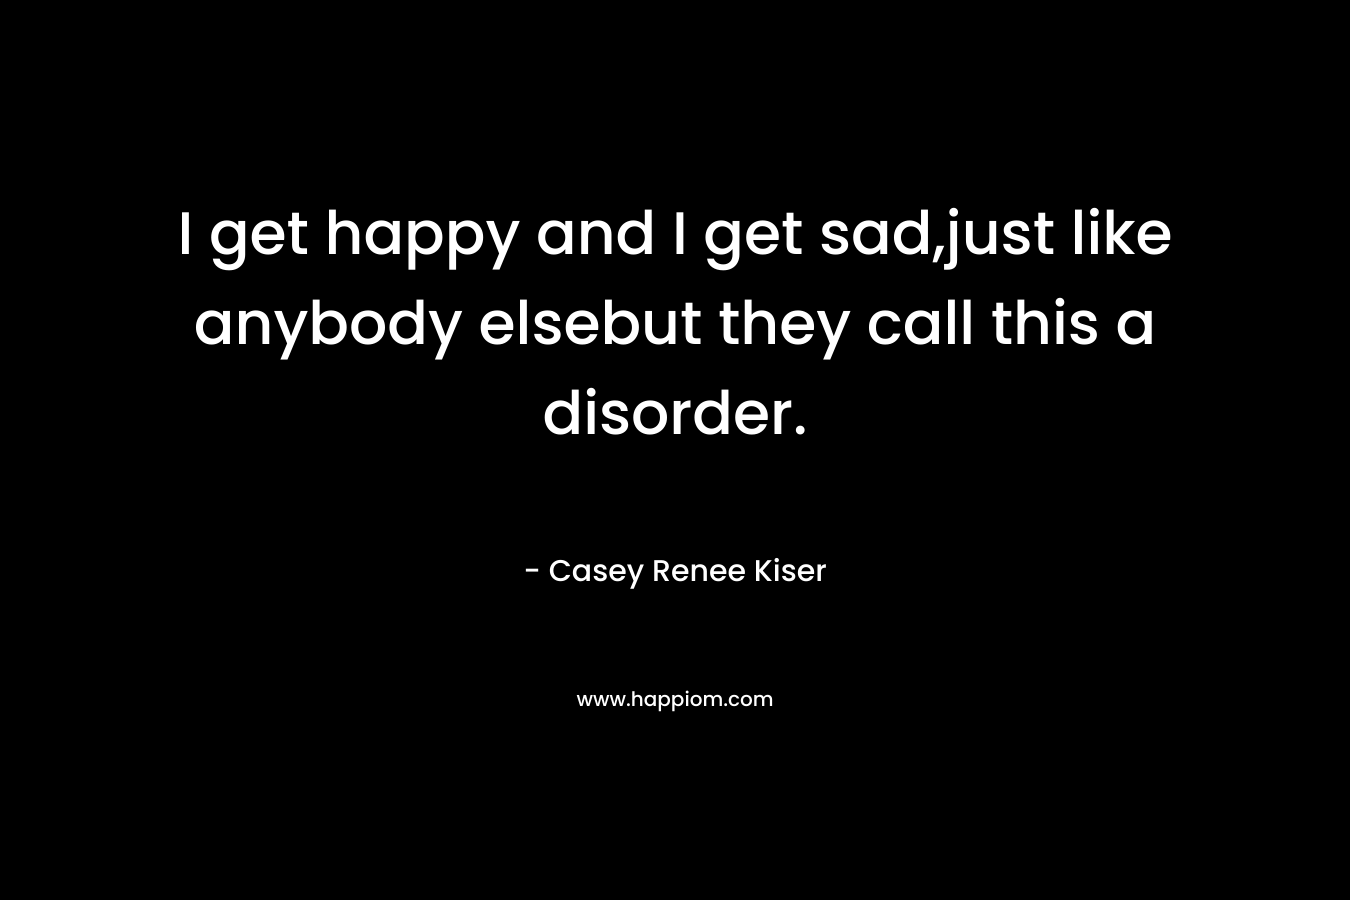 I get happy and I get sad,just like anybody elsebut they call this a disorder. – Casey Renee Kiser